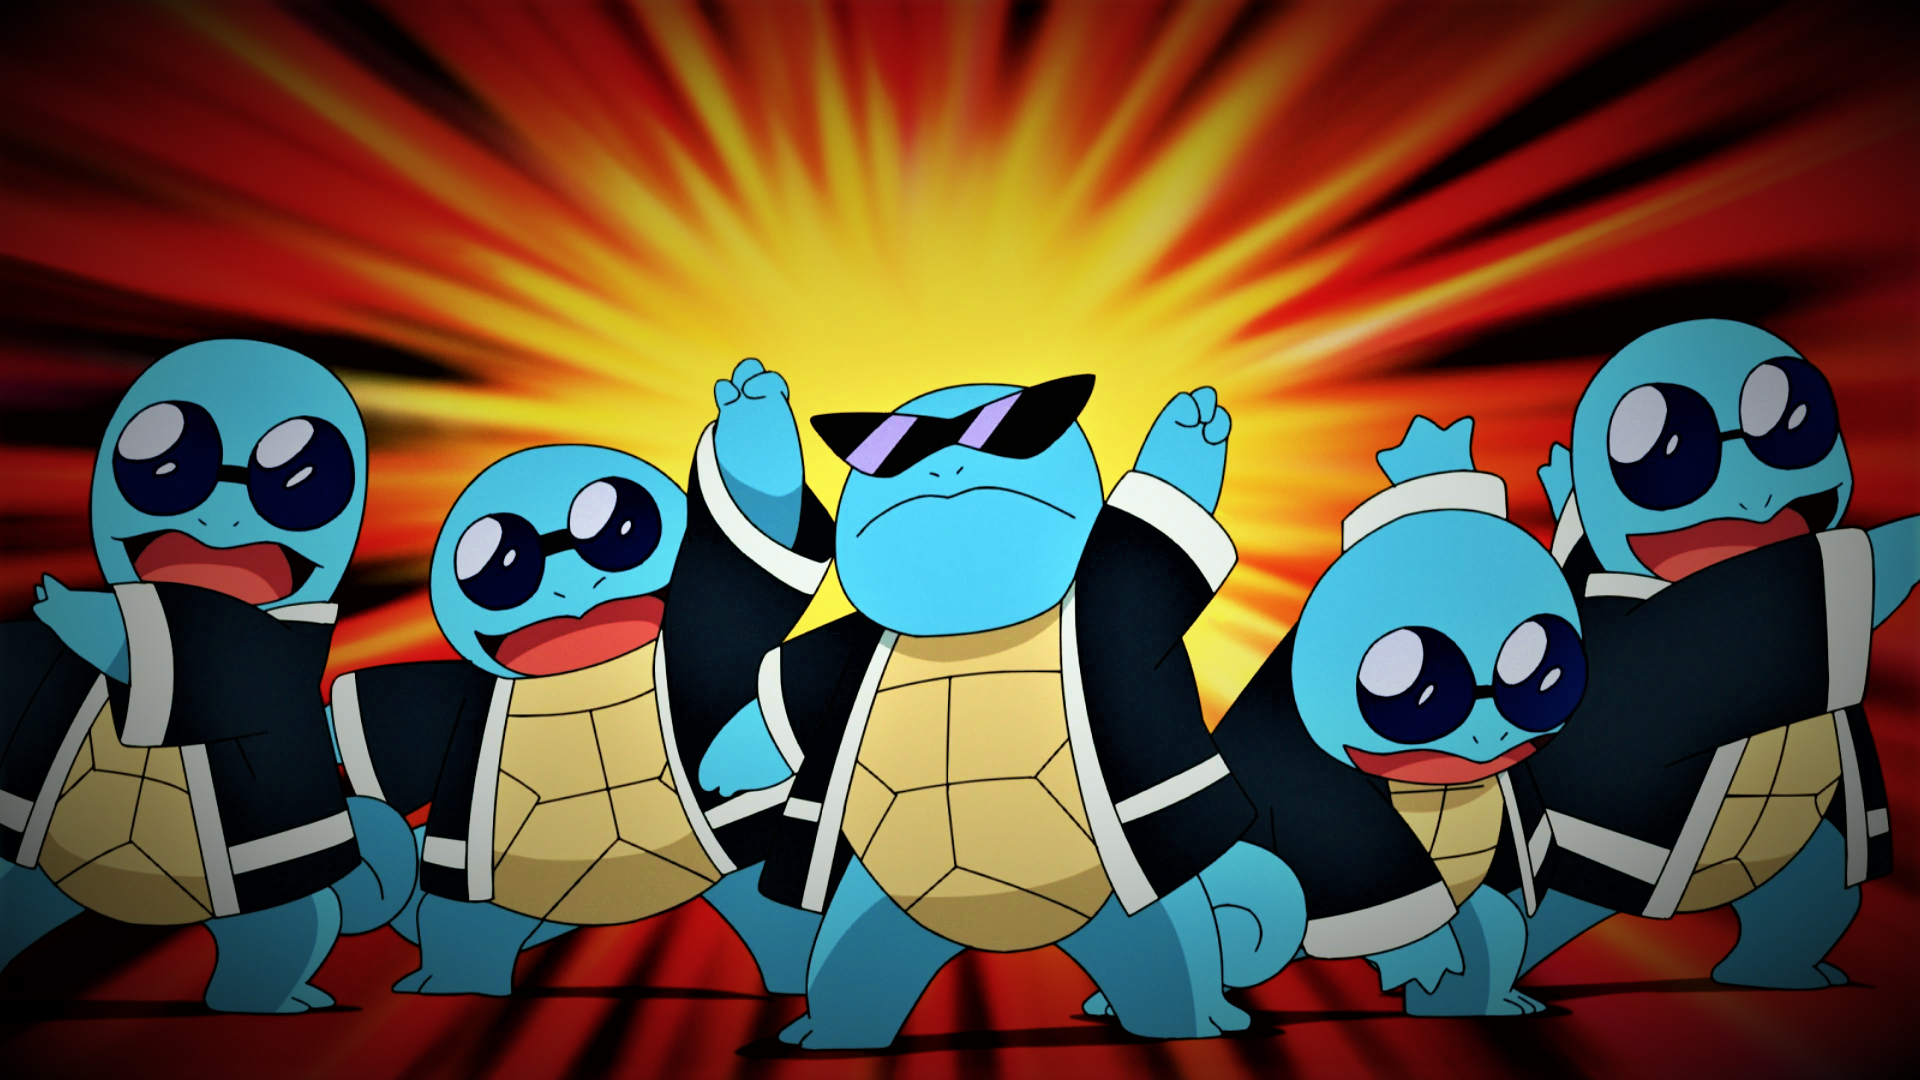 The Squirtle Squad By Pokemonsketchartist On Deviantart